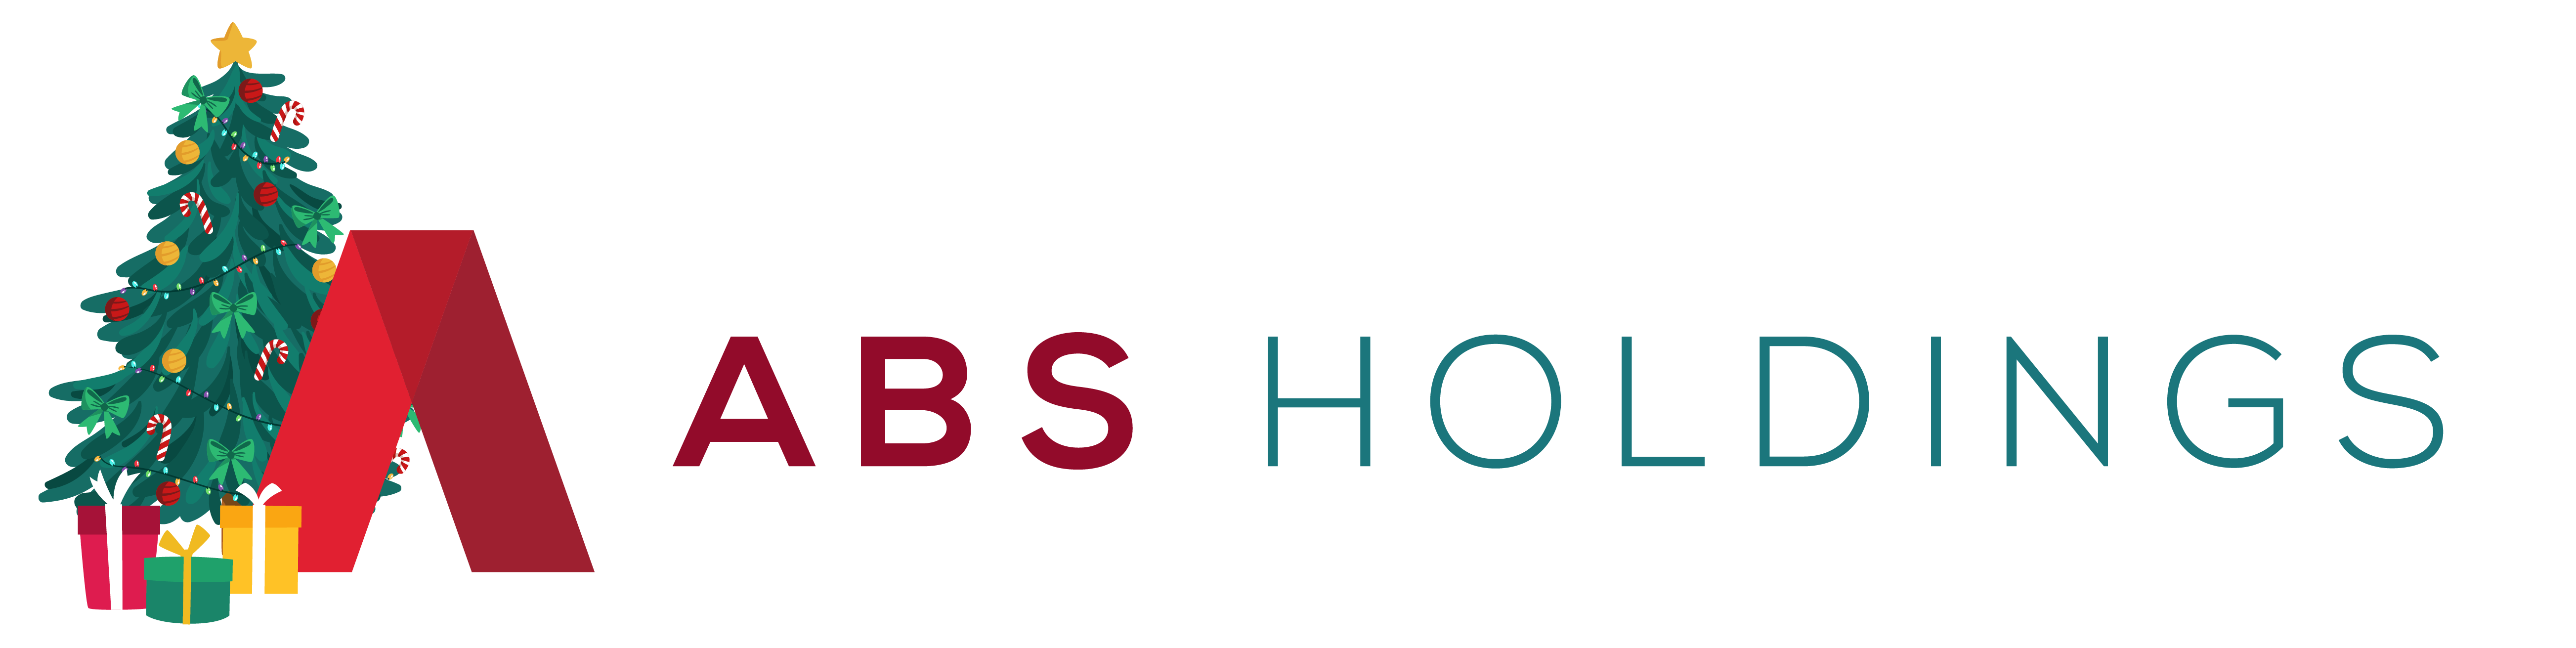 ABS Holdings Logo 